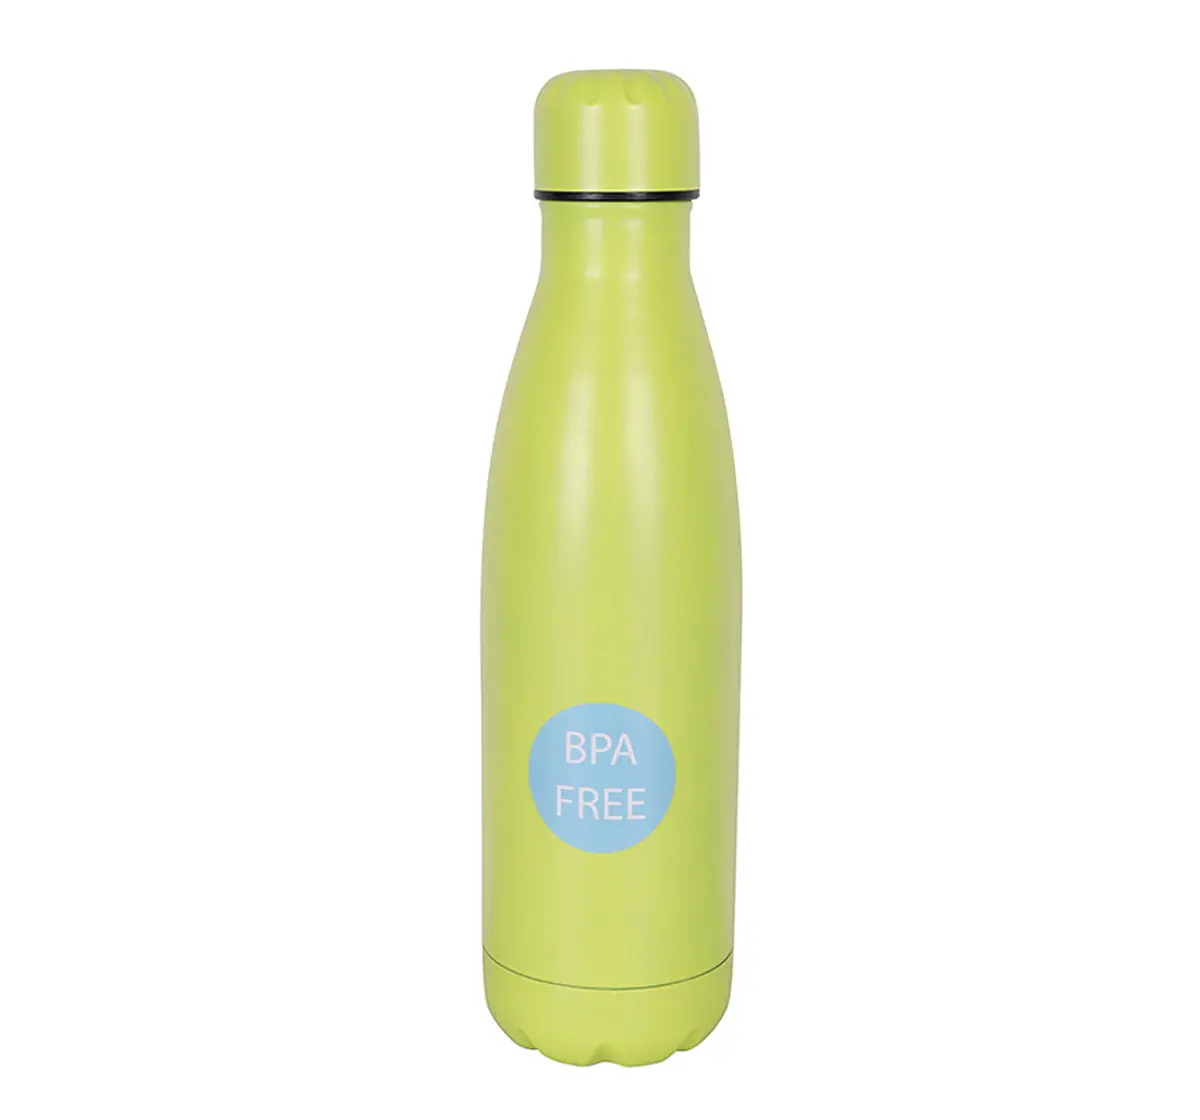 Stainless Steel Insulated Water Bottle by Hamster London for Kids, Yellow, Non-Toxic, BPA Free, 500ml, 5Y+